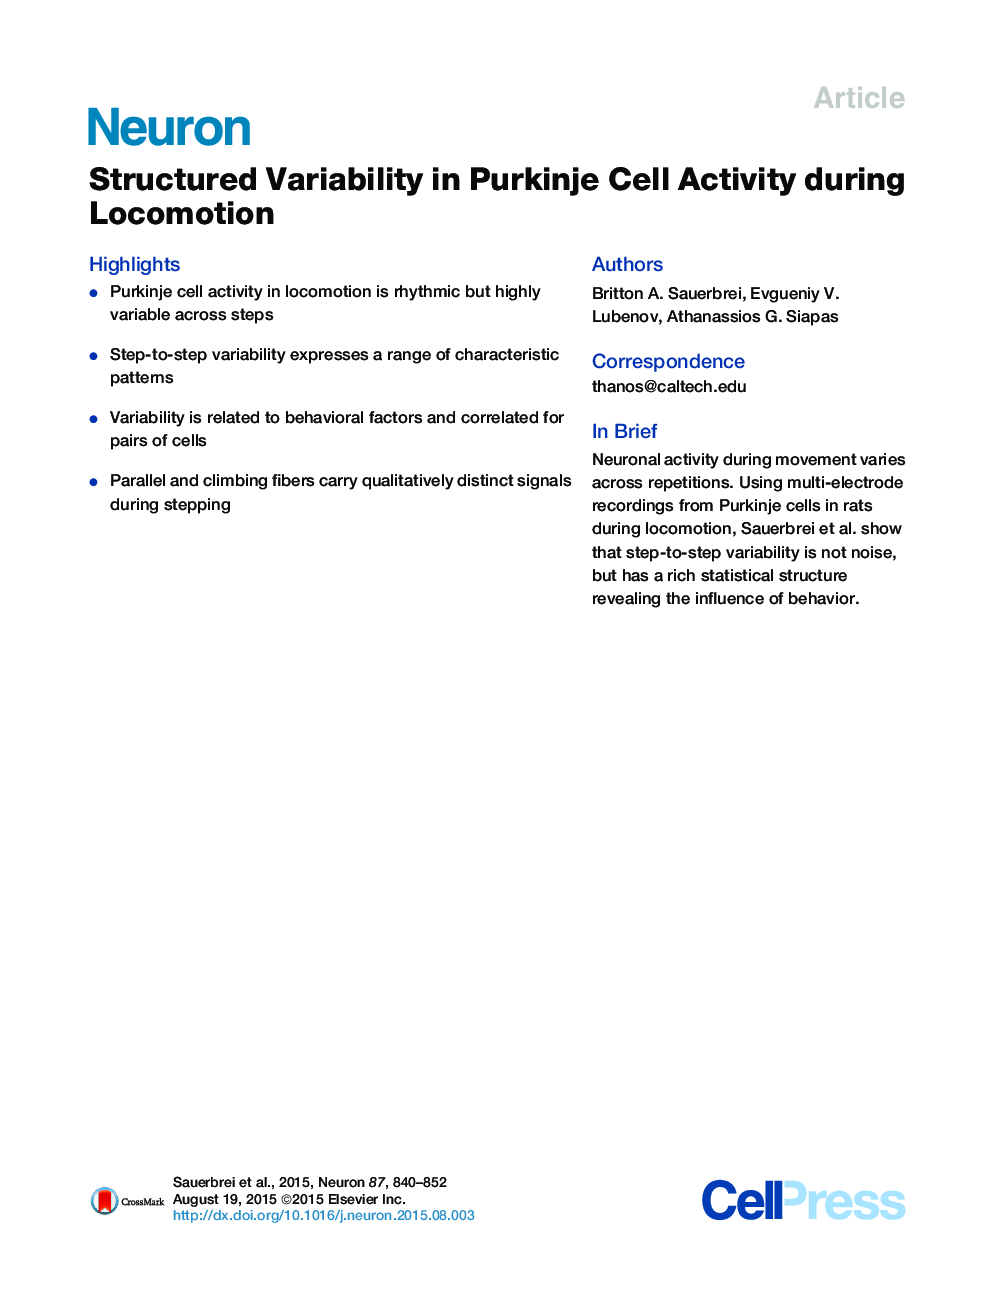 Structured Variability in Purkinje Cell Activity during Locomotion